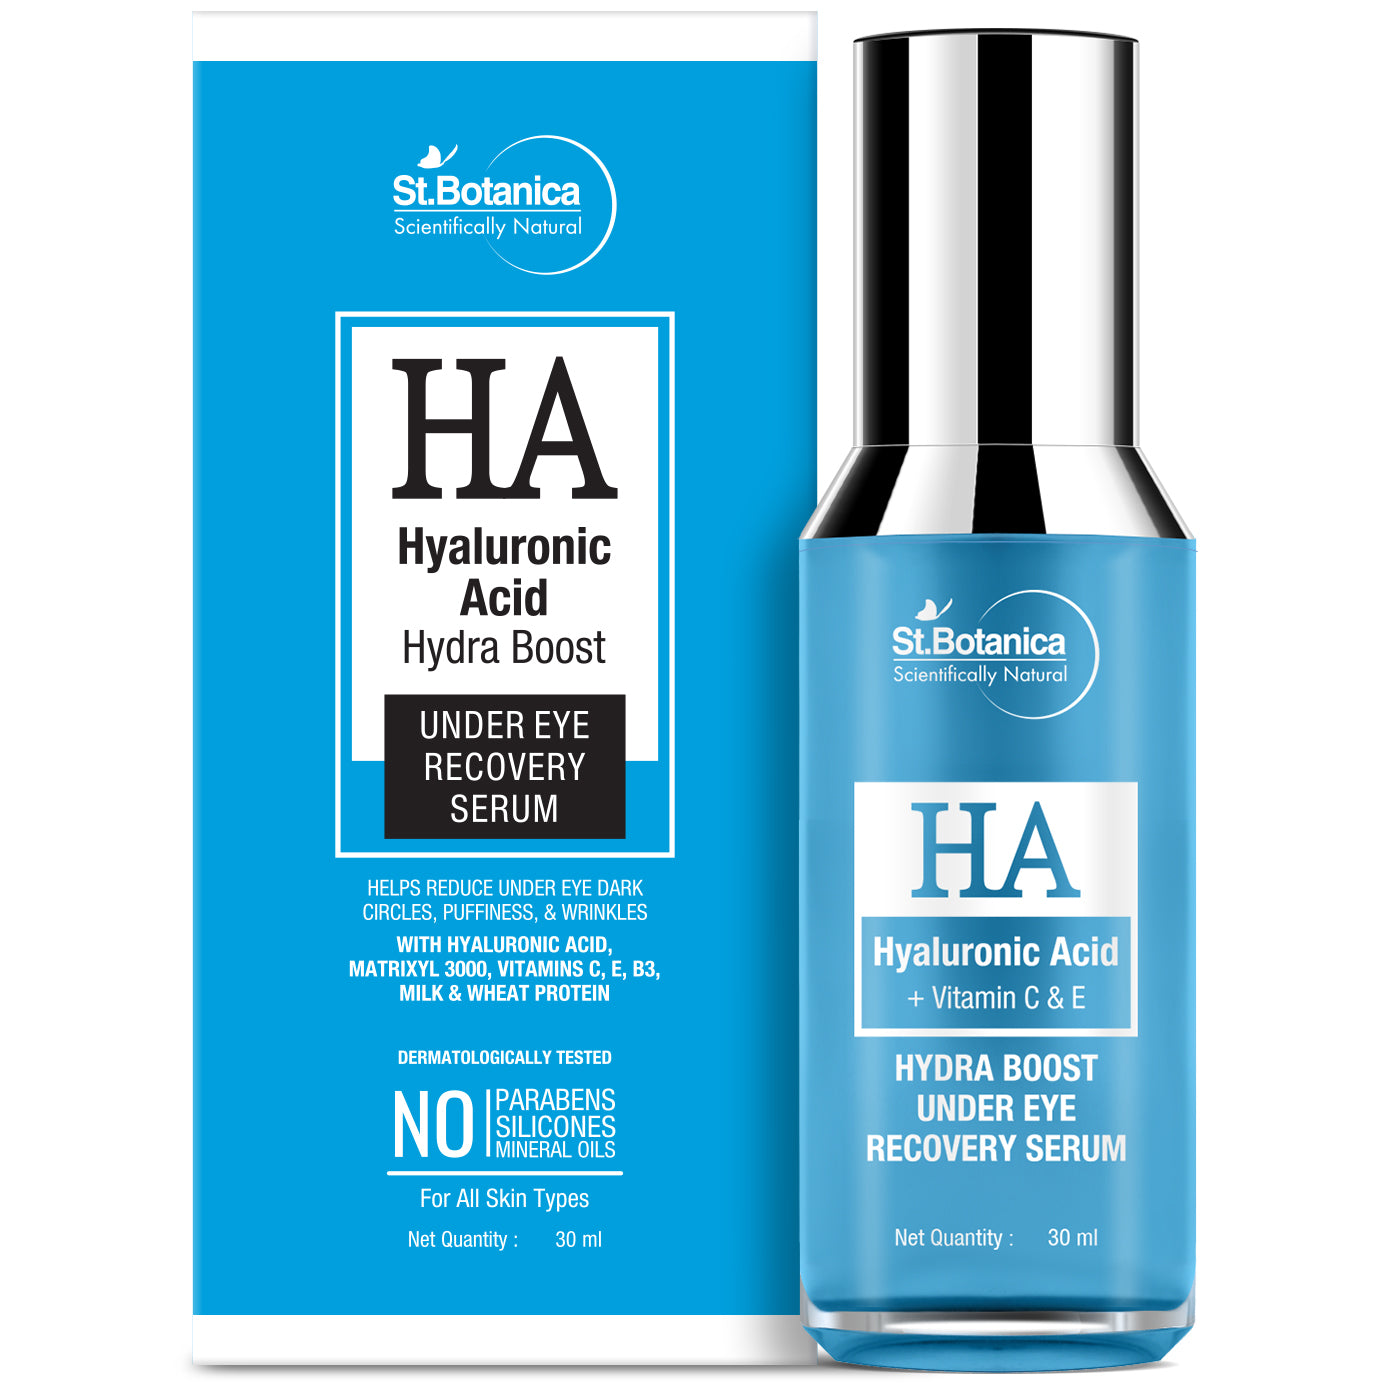 St.Botanica Hyaluronic Acid Hydra Boost Under Eye Recovery Serum - For Dark Circles, Puffiness & Wrinkle, 30 ml